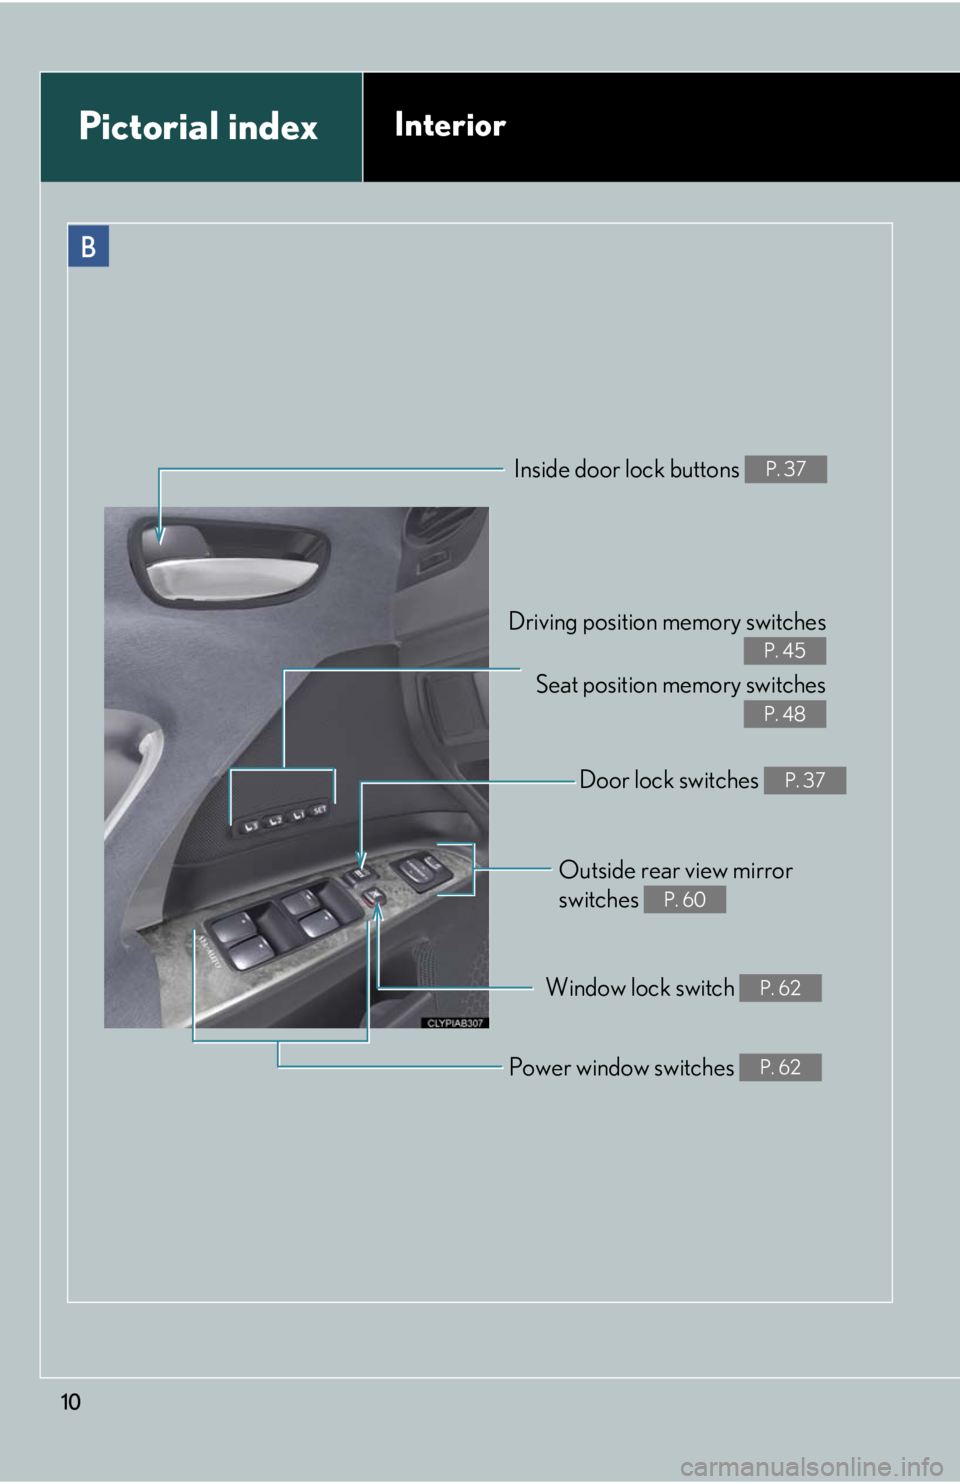 Lexus IS F 2008  Do-It-Yourself Maintenance / 10
B
Driving position memory switchesSeat position  memory switches
P. 45
P. 48
Inside door lock buttons P. 37
Outside rear view mirror 
switches 
P. 60
Window lock switch P. 62
Power window switches 